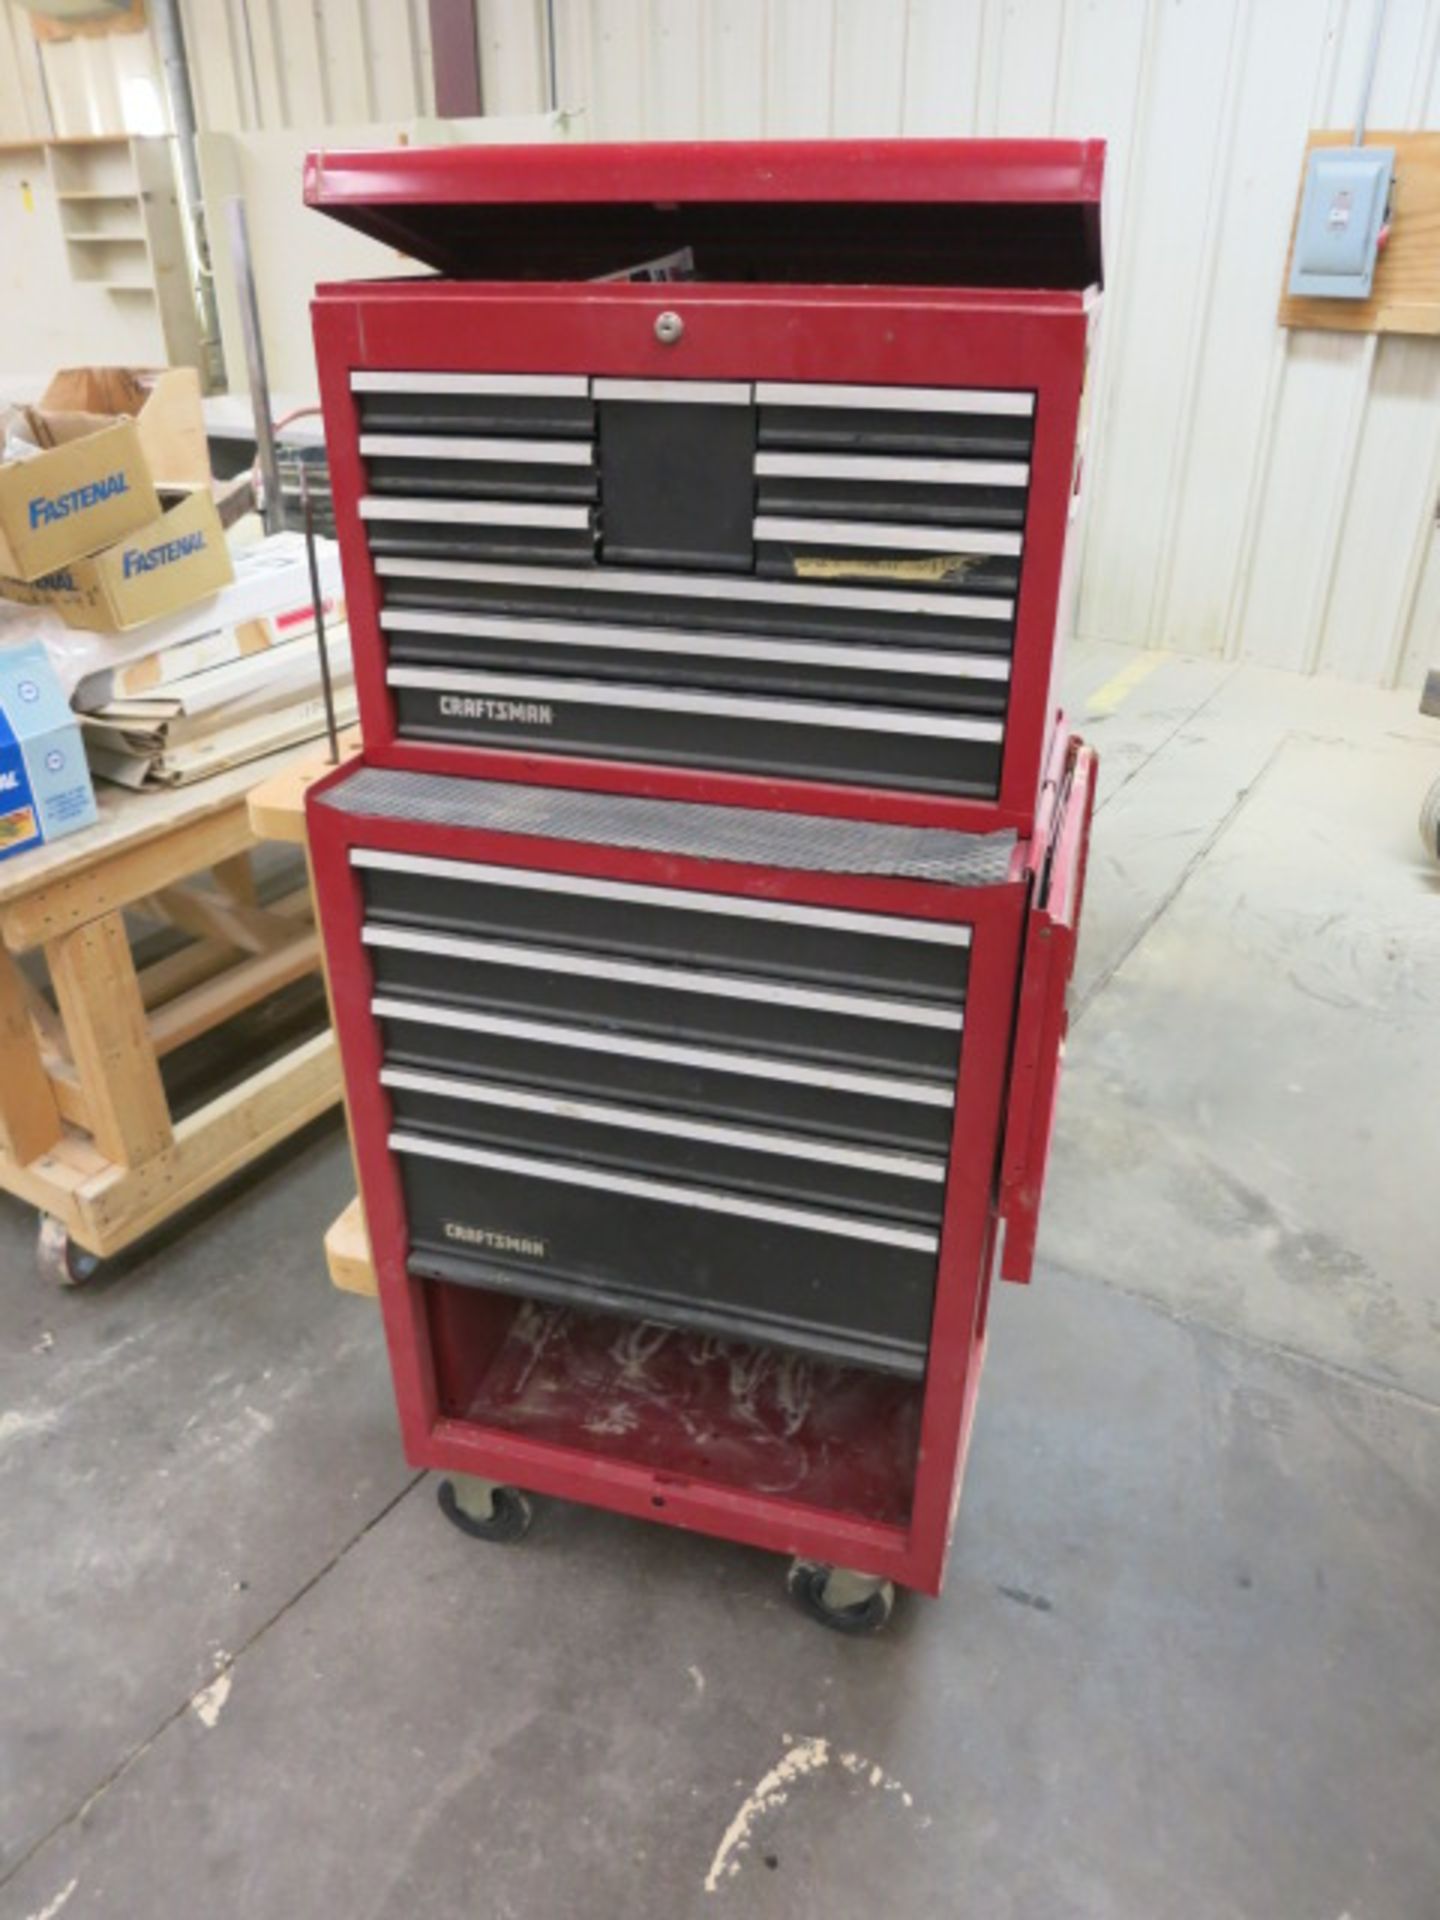 Craftsman Tool Cabinet with Contents - removal available October 26, 2018